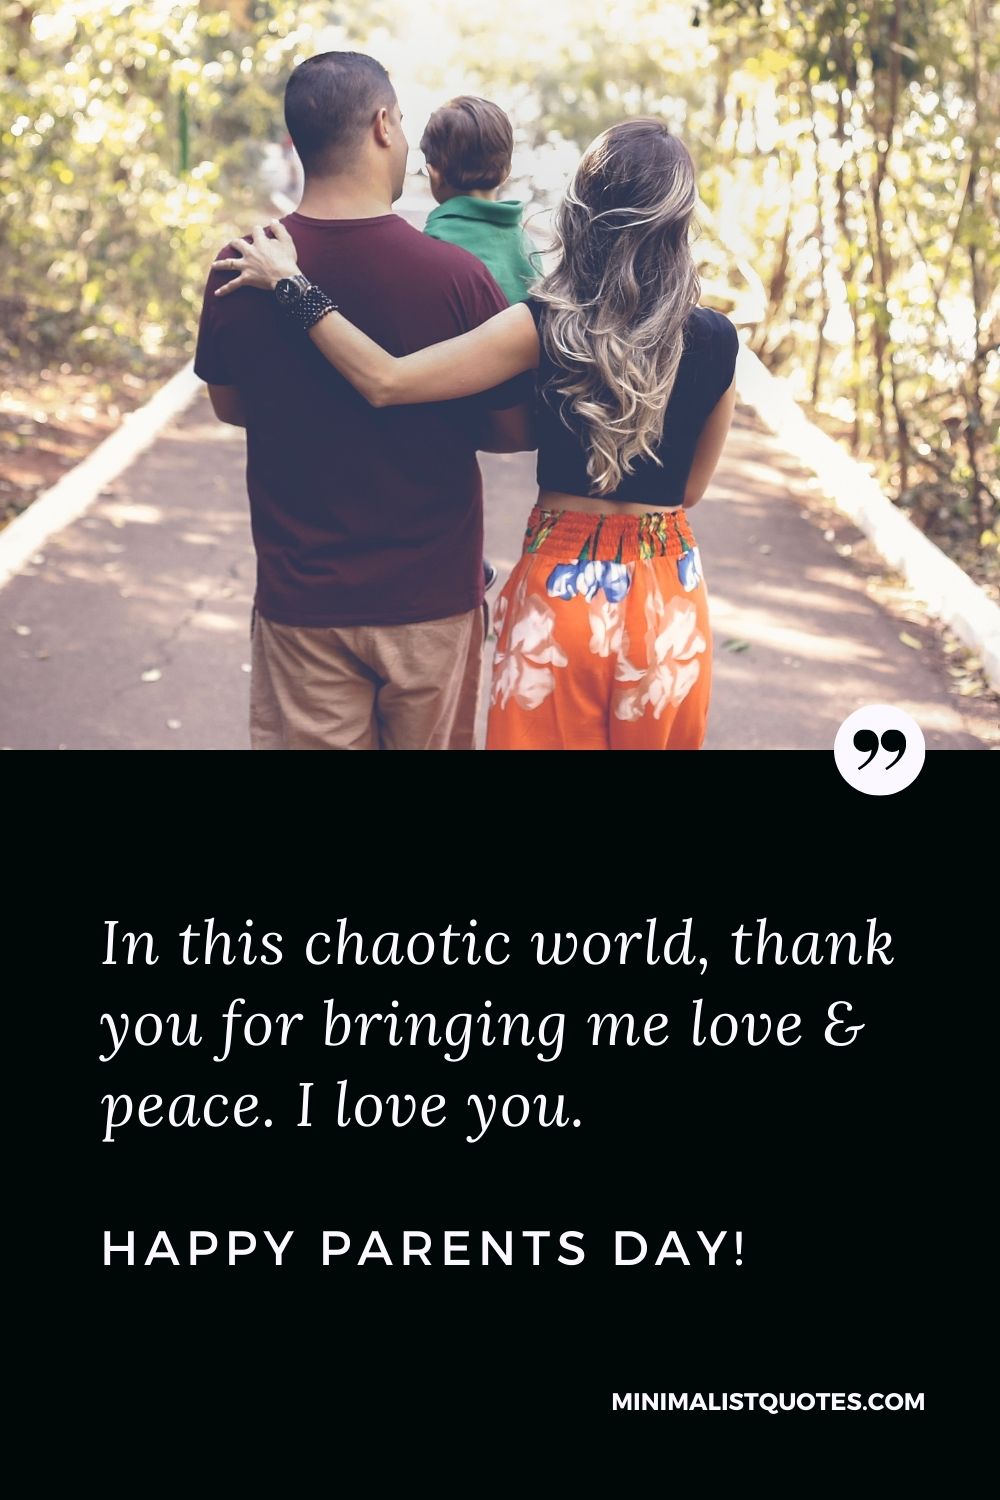 Parents Day Quote, Wish & Message With Image: In this chaotic world, thank you for bringing me love & peace. I love you. Happy Parents Day!